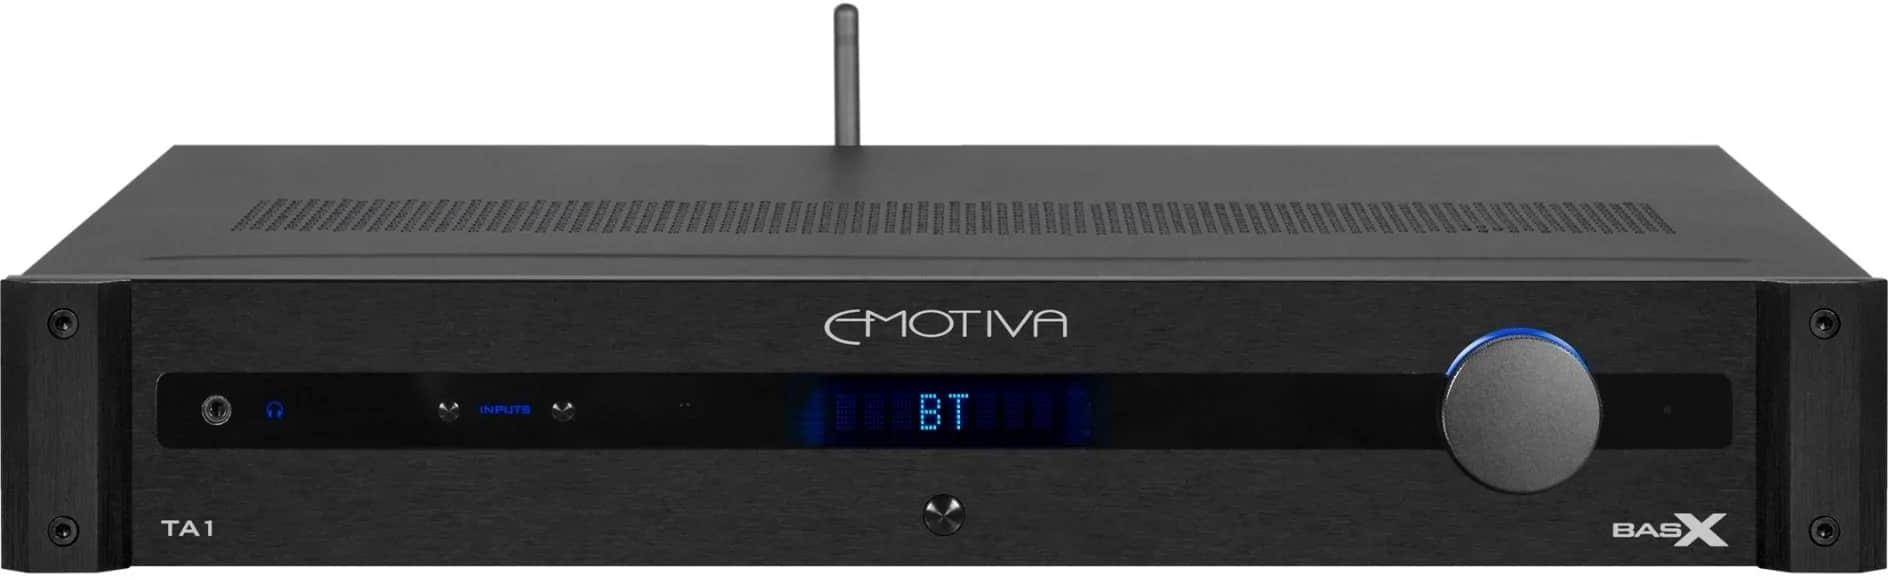 Emotiva TA-1 - Stereo Preamp/DAC/Tuner with Integrated Amplifier zoom image